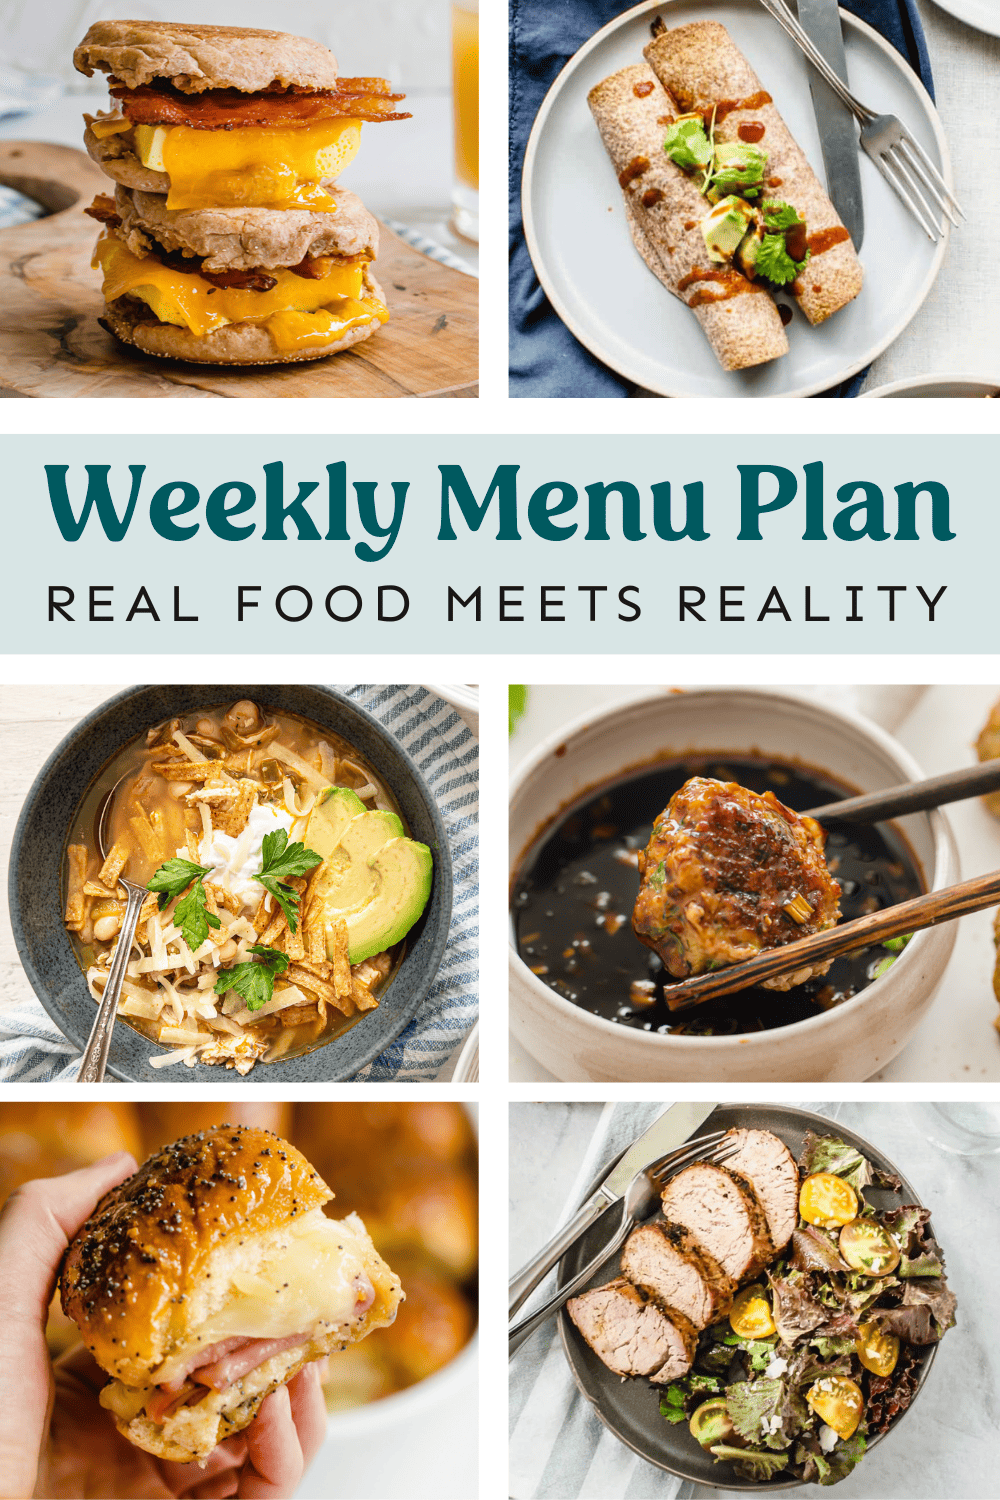 Collage of meals on the menu plan for the week.